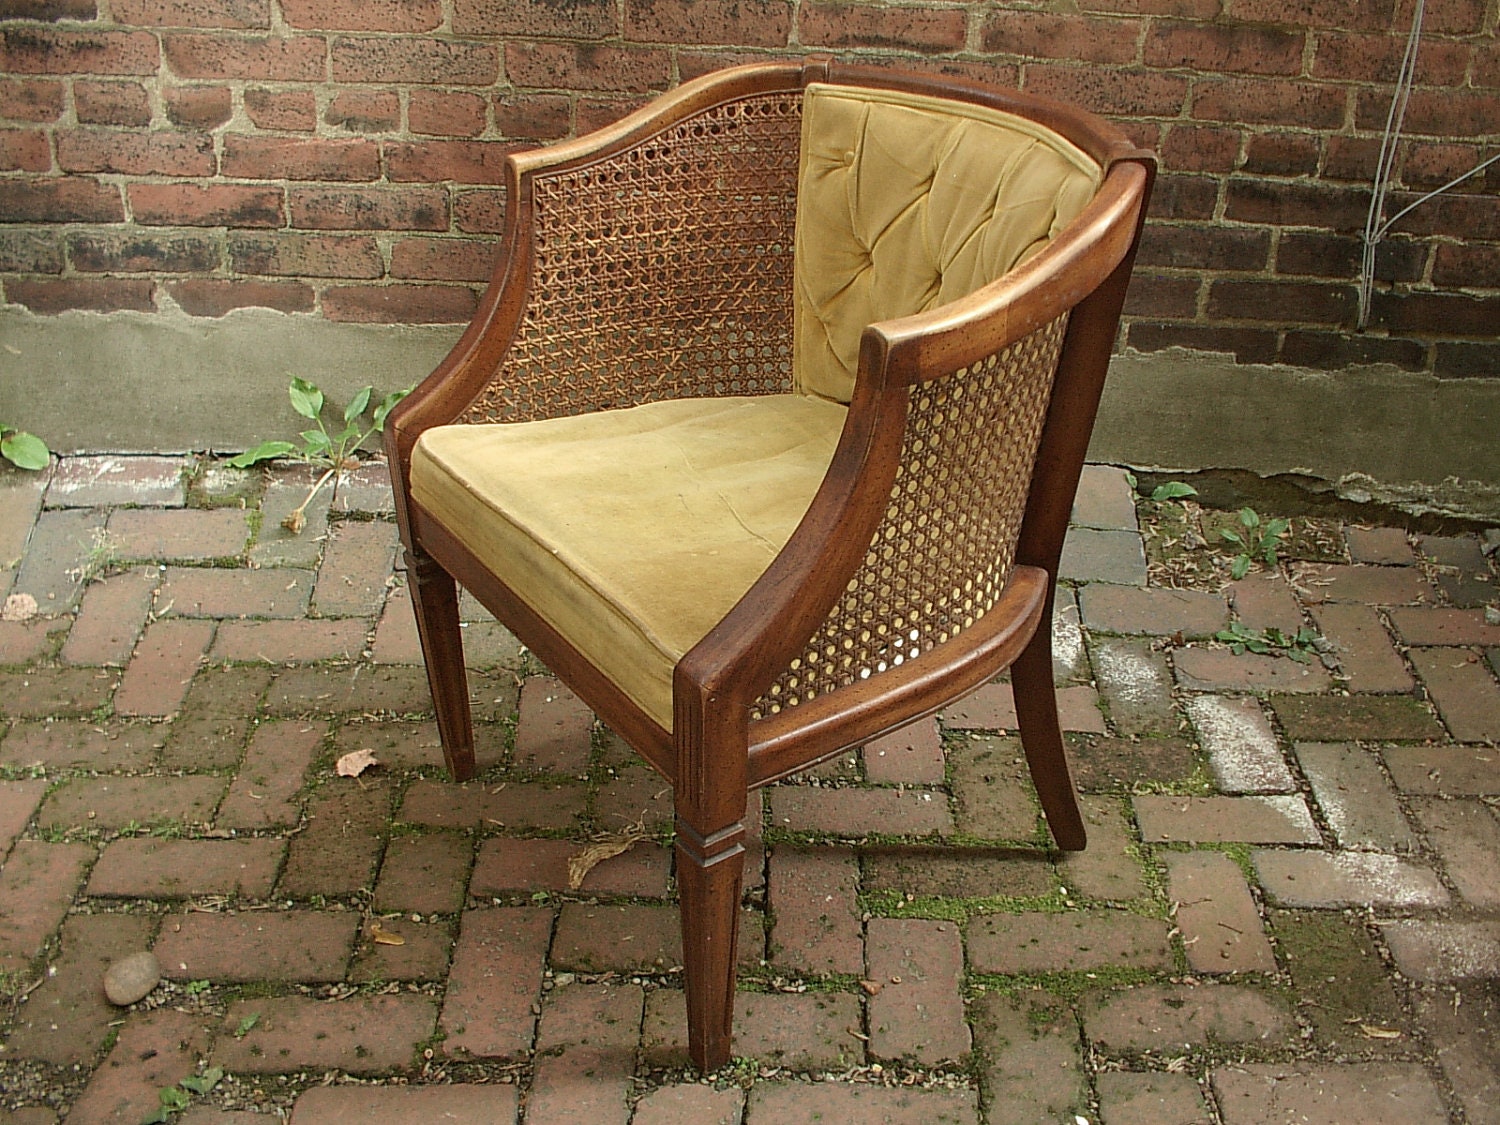 Vintage 1940's French Provincial arm chair pale by ShoponSherman